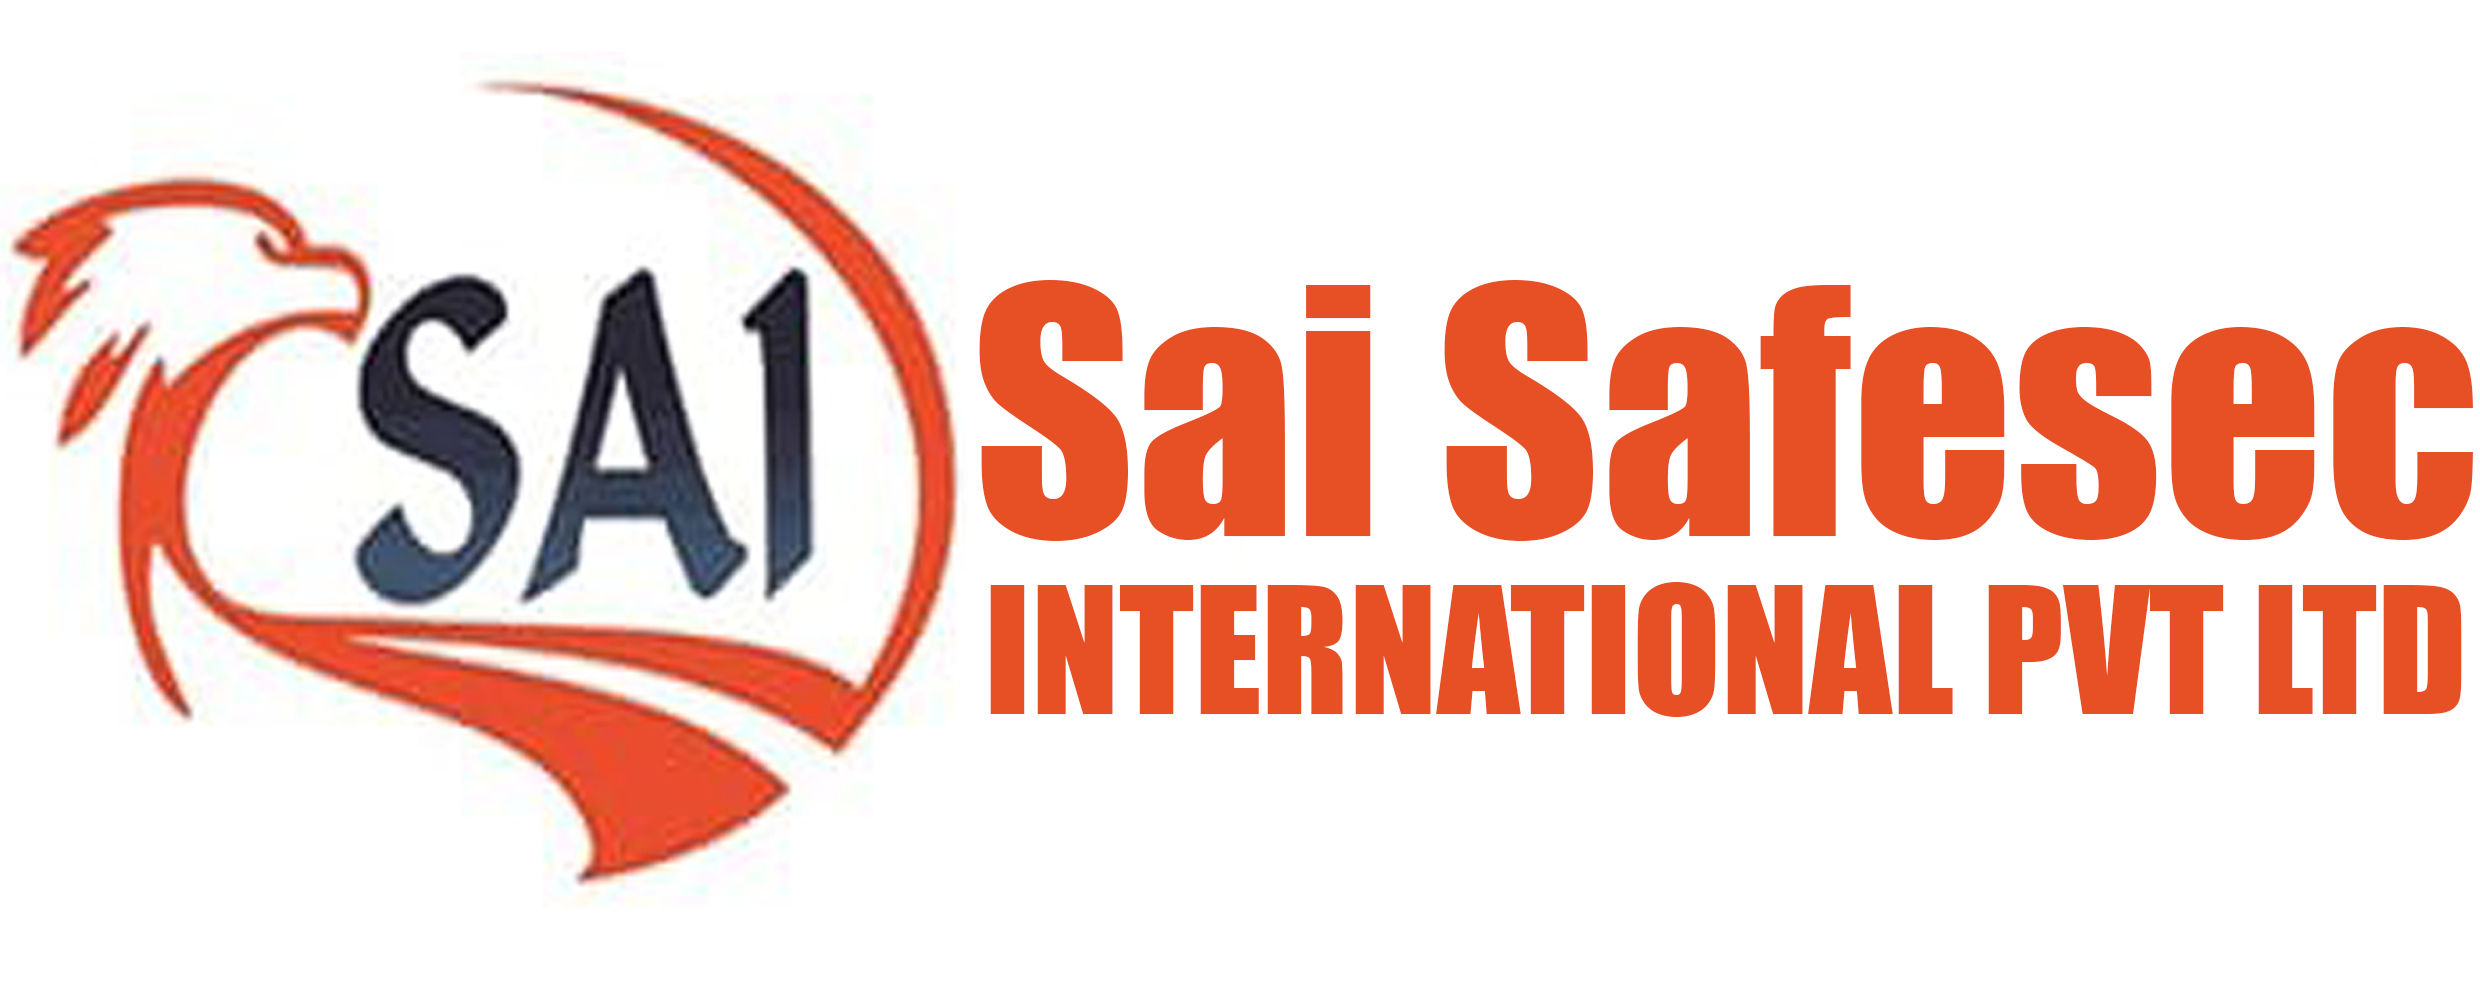 Fire Safety, integrated Security and Surveillance systems Sai safesec